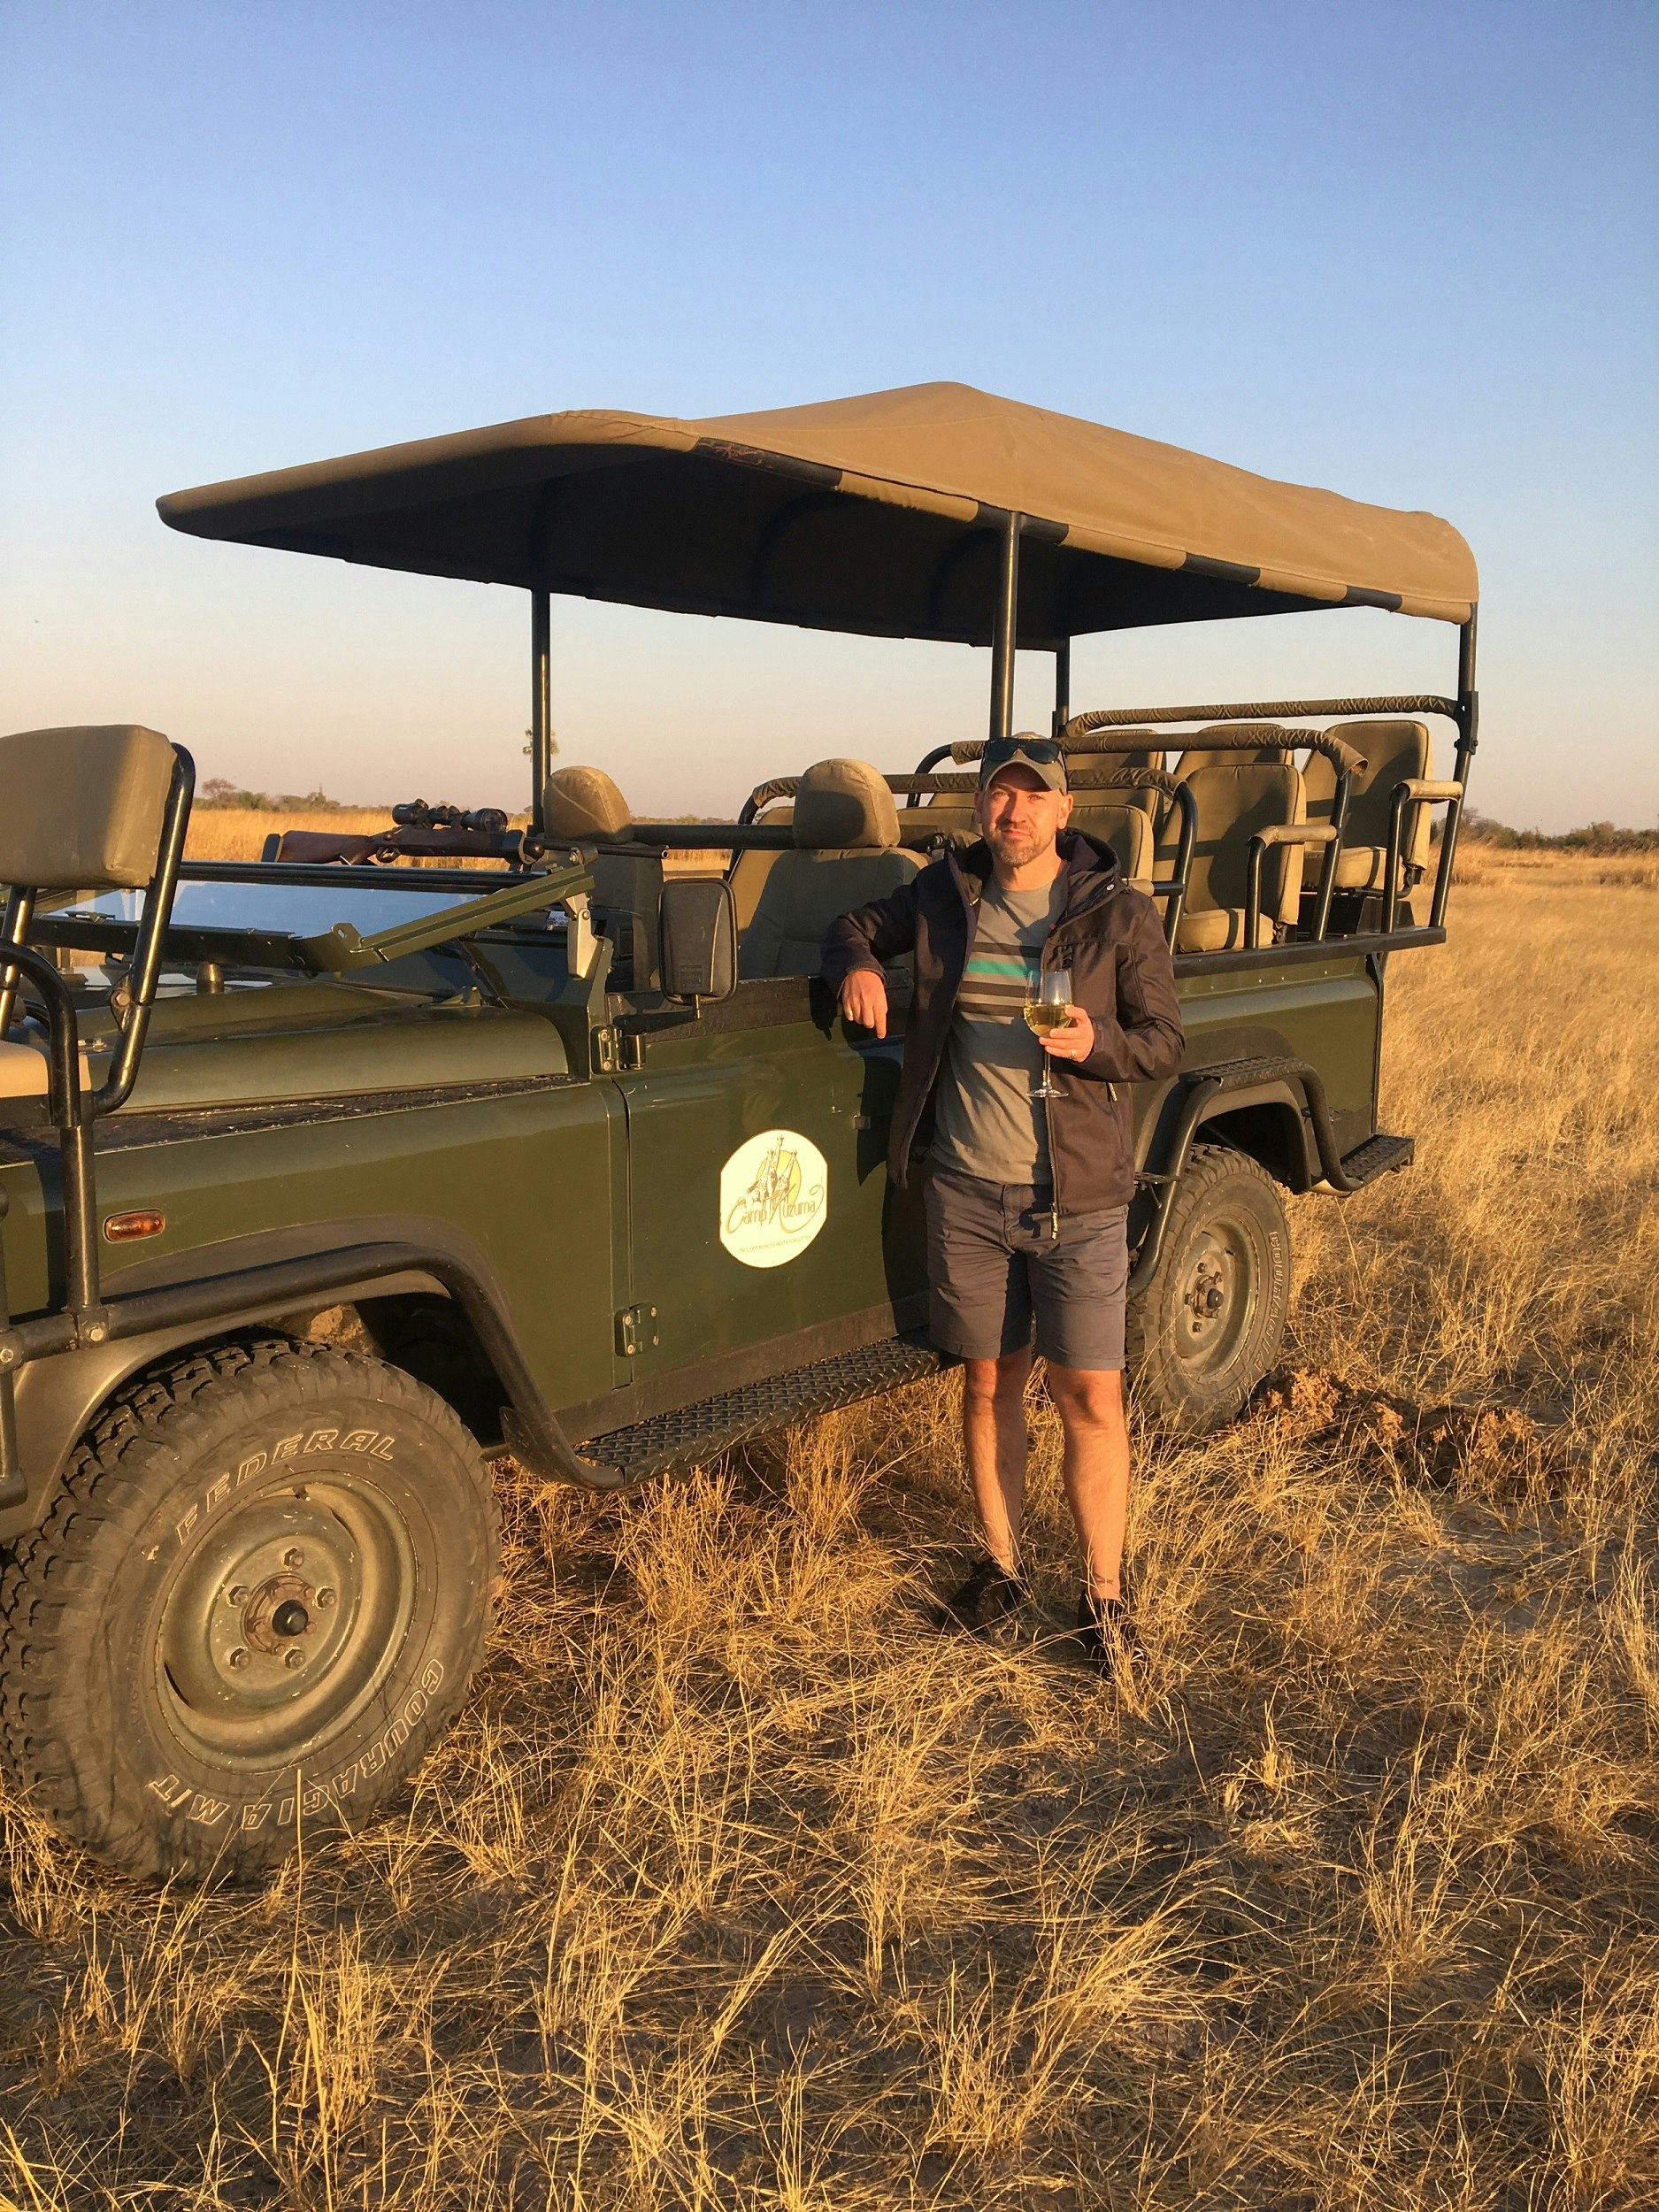 A white man holding a glass of wine stands beside a 4WD in open savannah